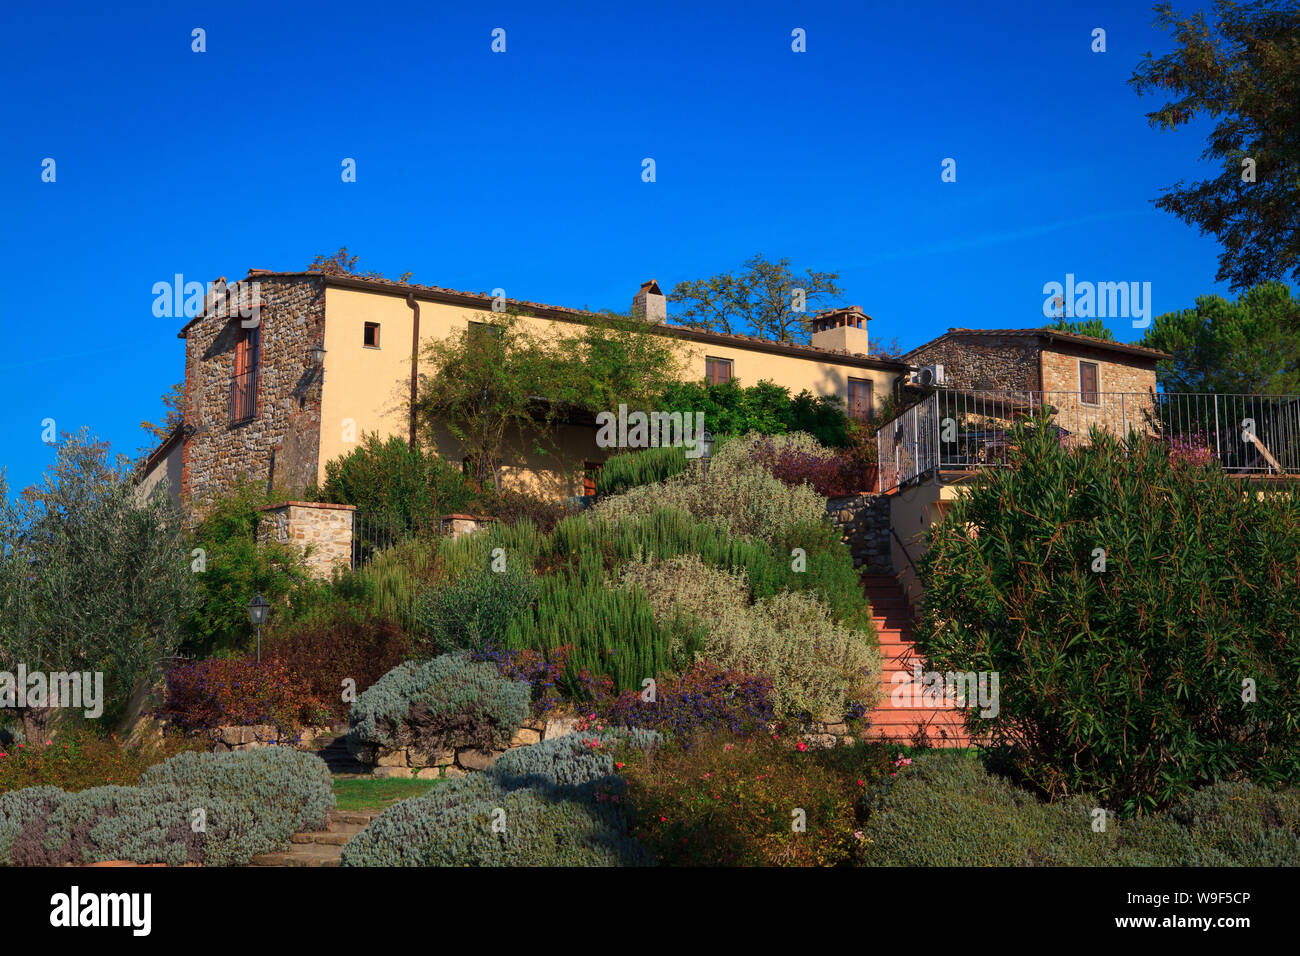 Typical Italian rural house with restaurant in lush vegetation in the afternoon in summer. Stock Photo